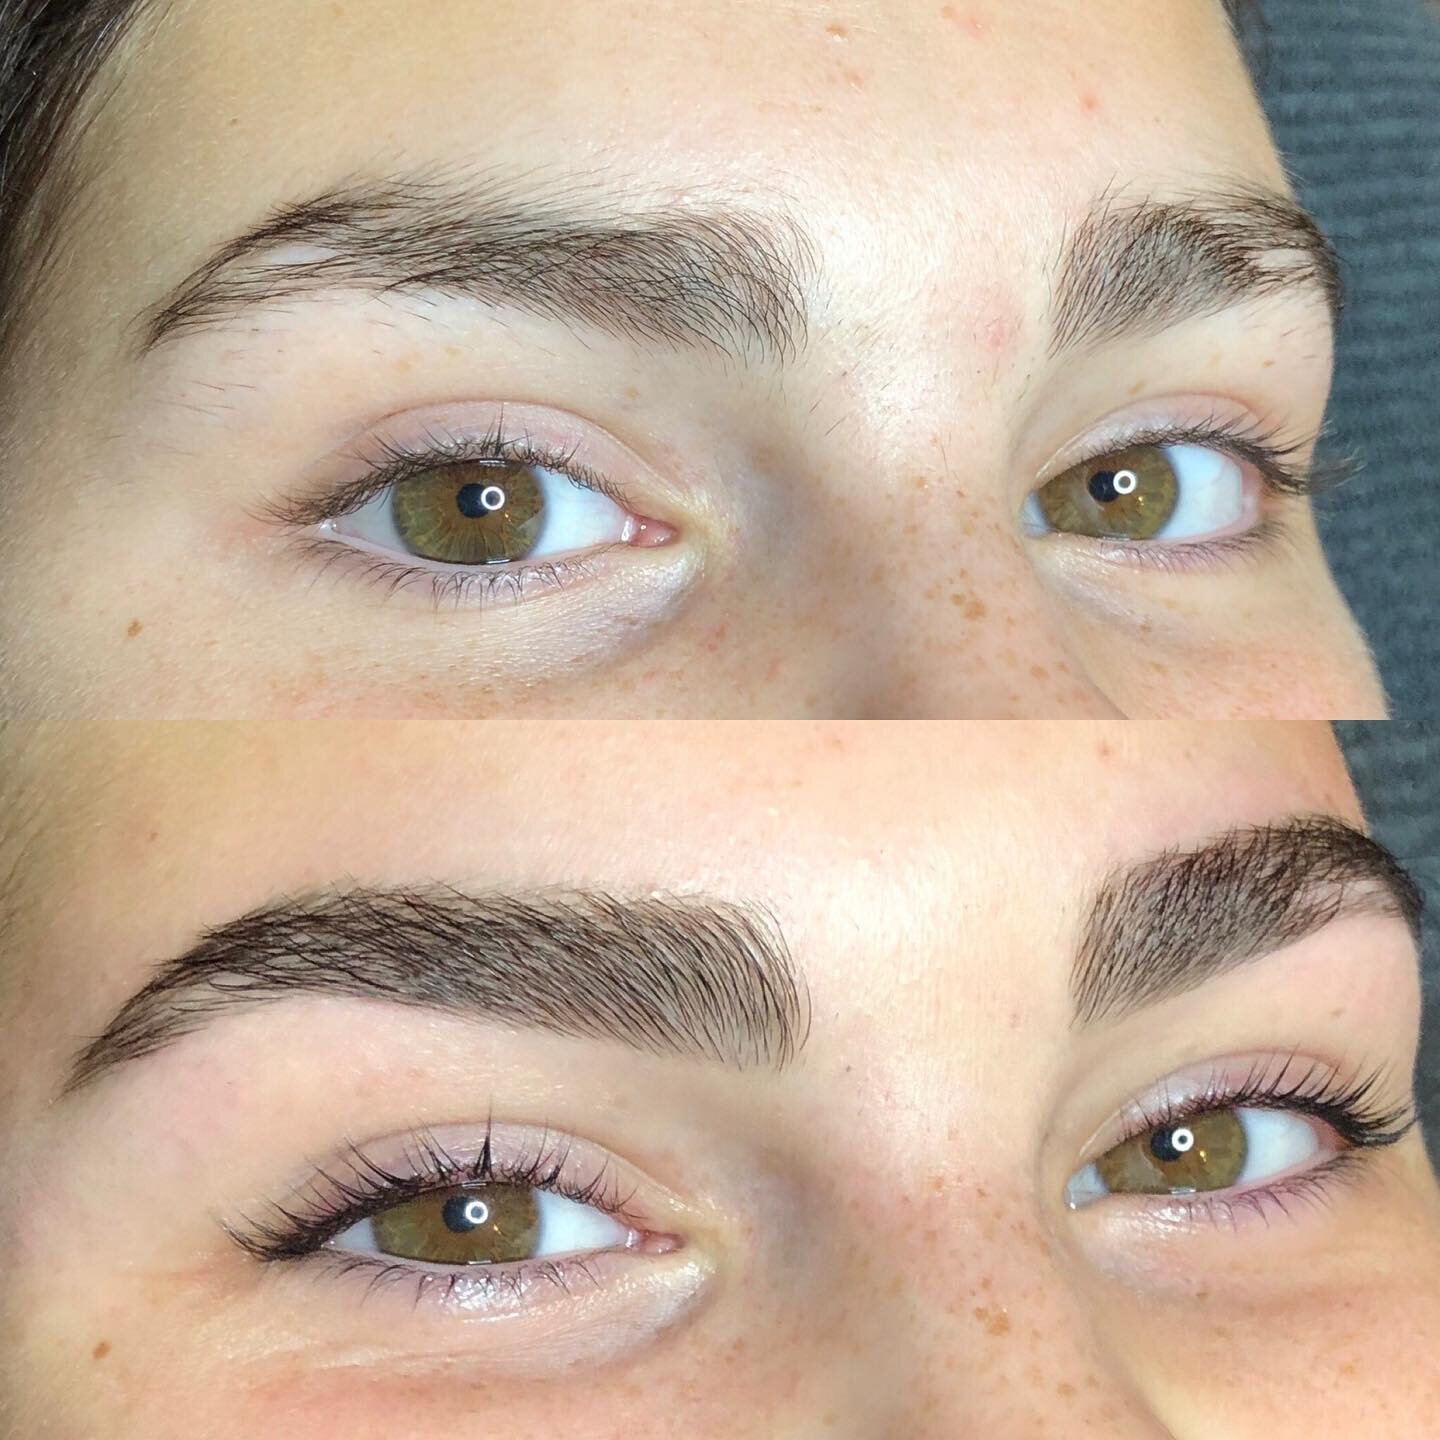 Before and after brow sculpt and tint! ✨